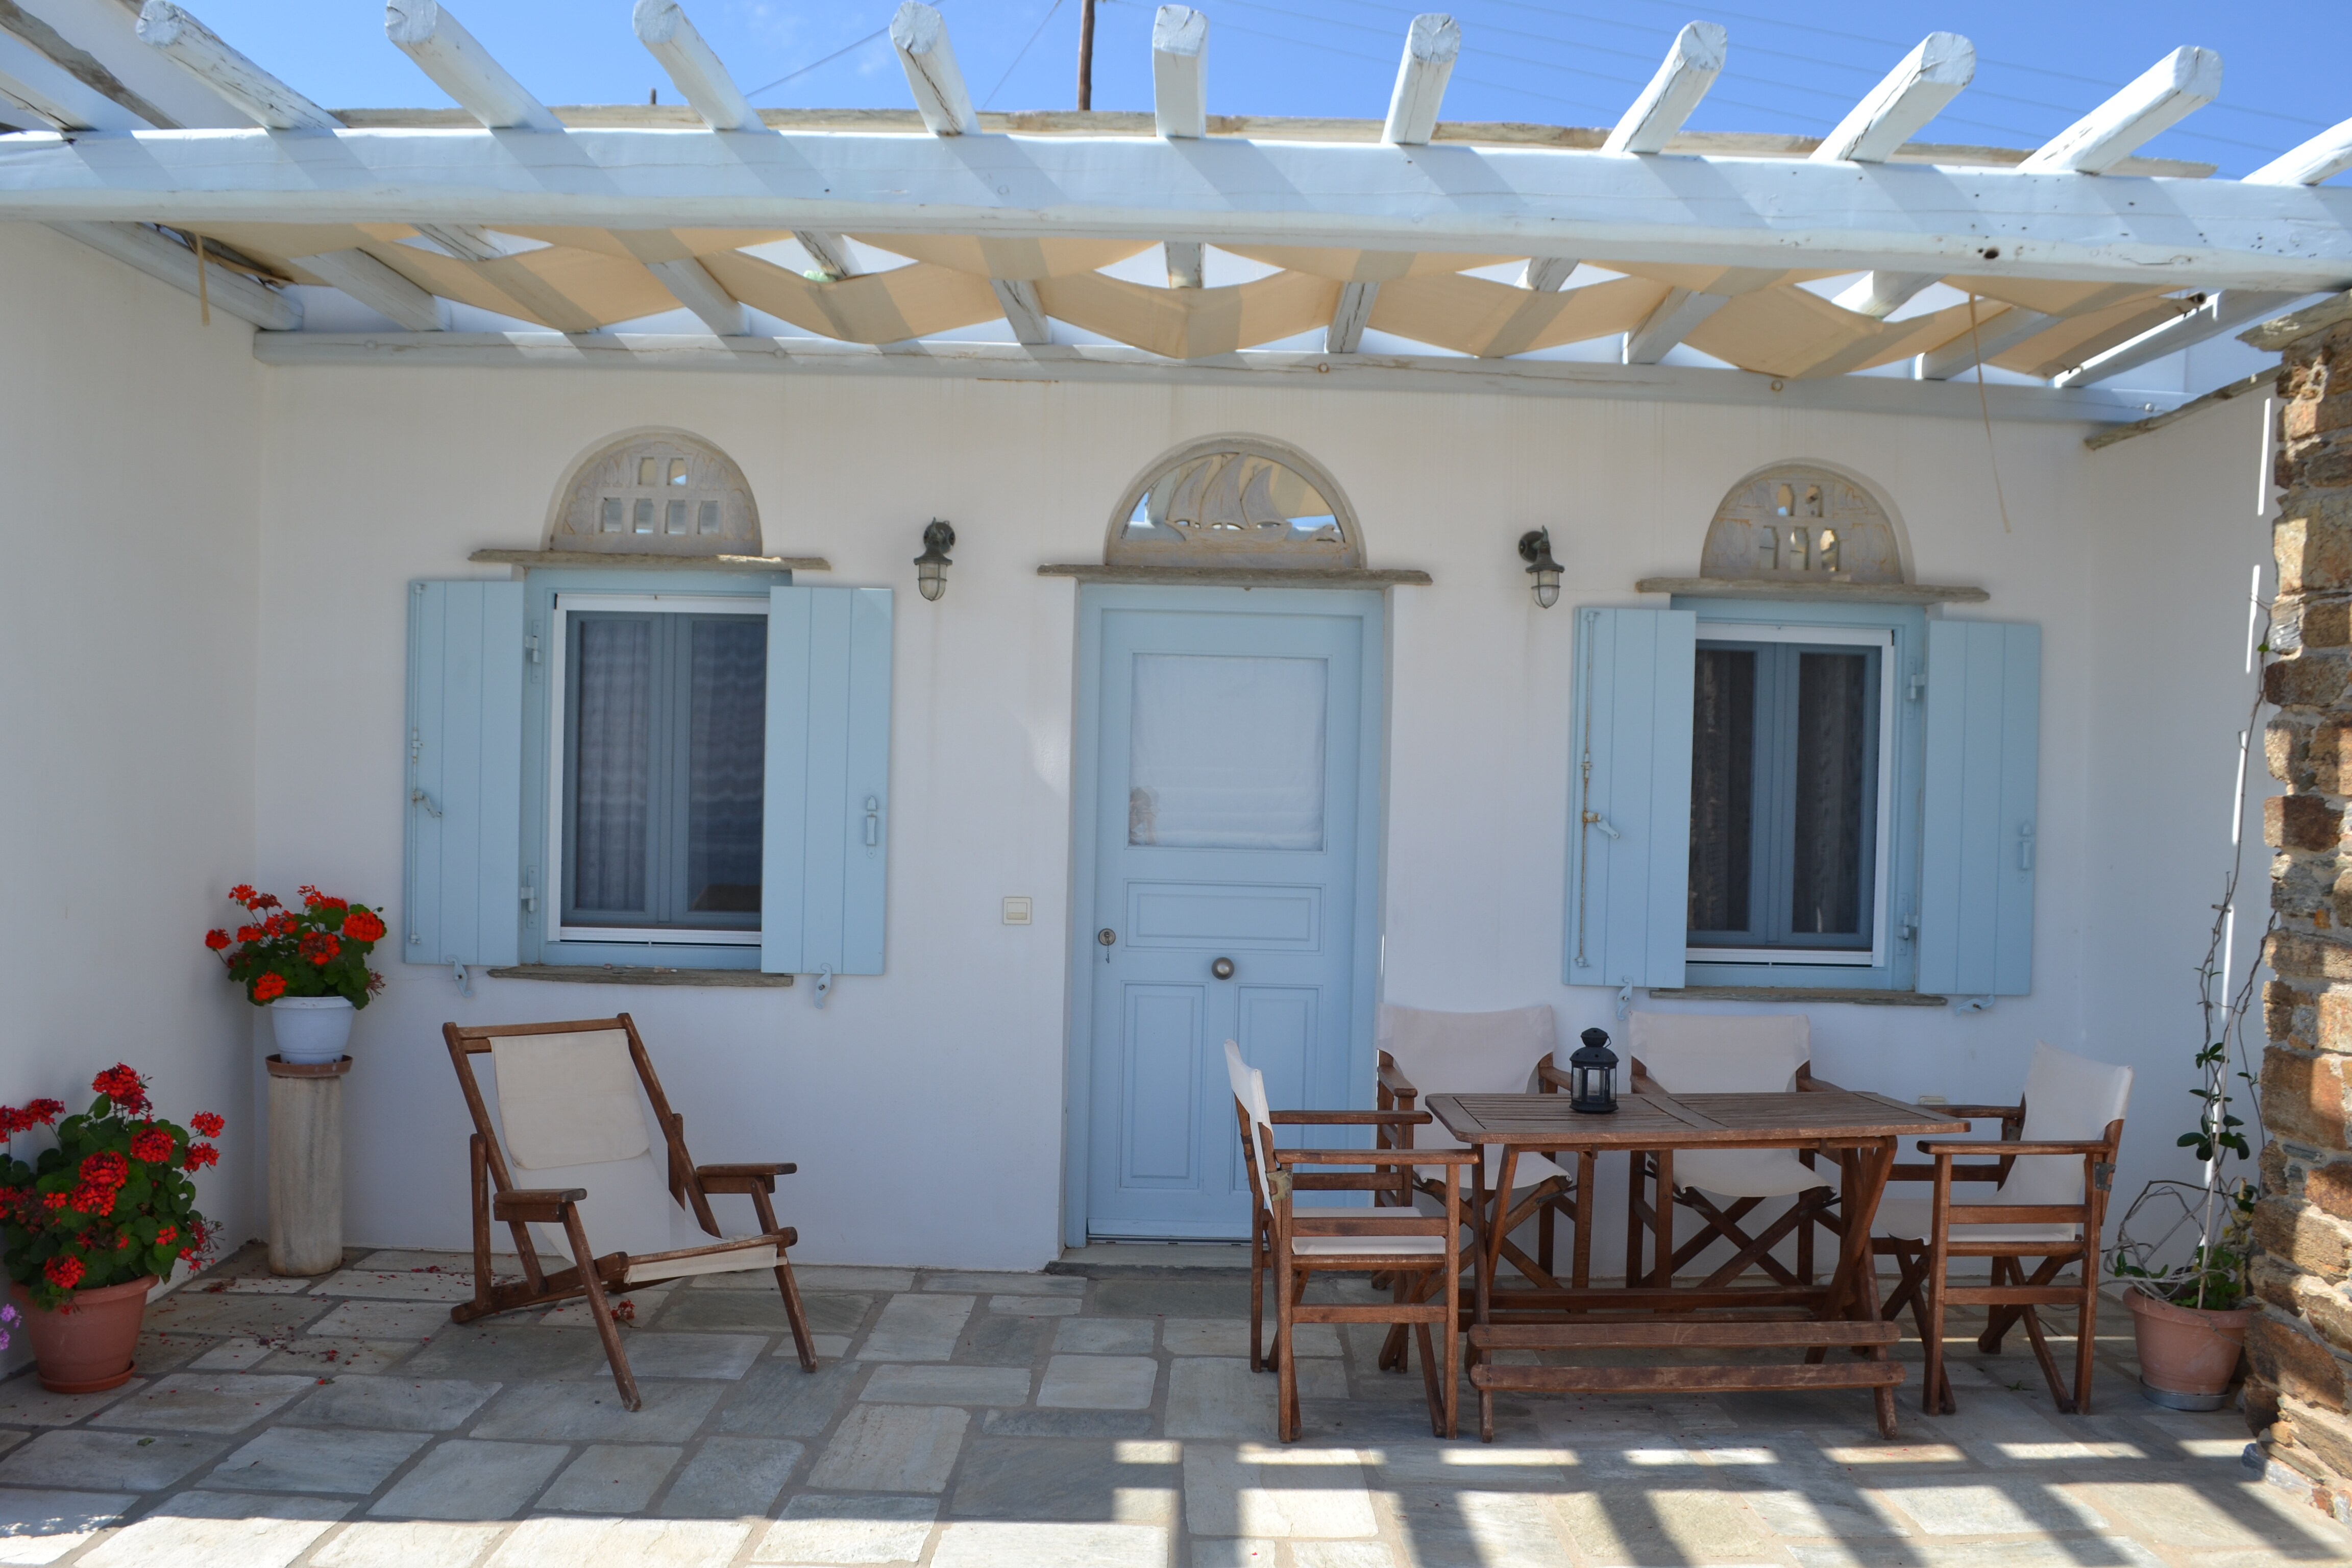 Property Image 2 - Villa Ioanna - Vacation Houses for rent close to the beach